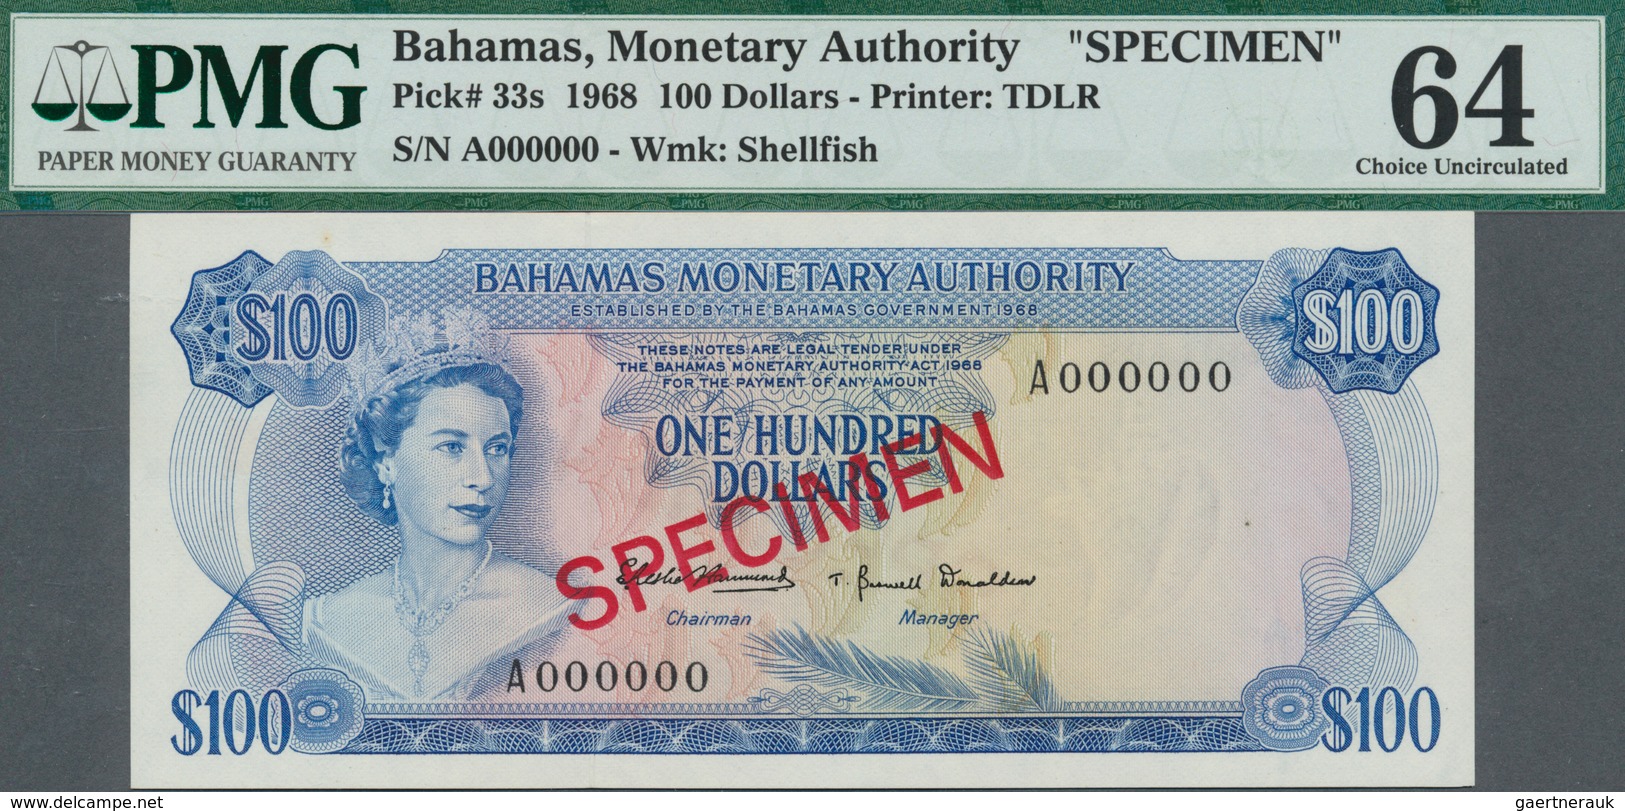 01098 Bahamas: set of 8 SPECIMEN banknotes from 1/2 Dollar 1968 to 100 Dollars 1968 Specimen P. 26s-33s, a